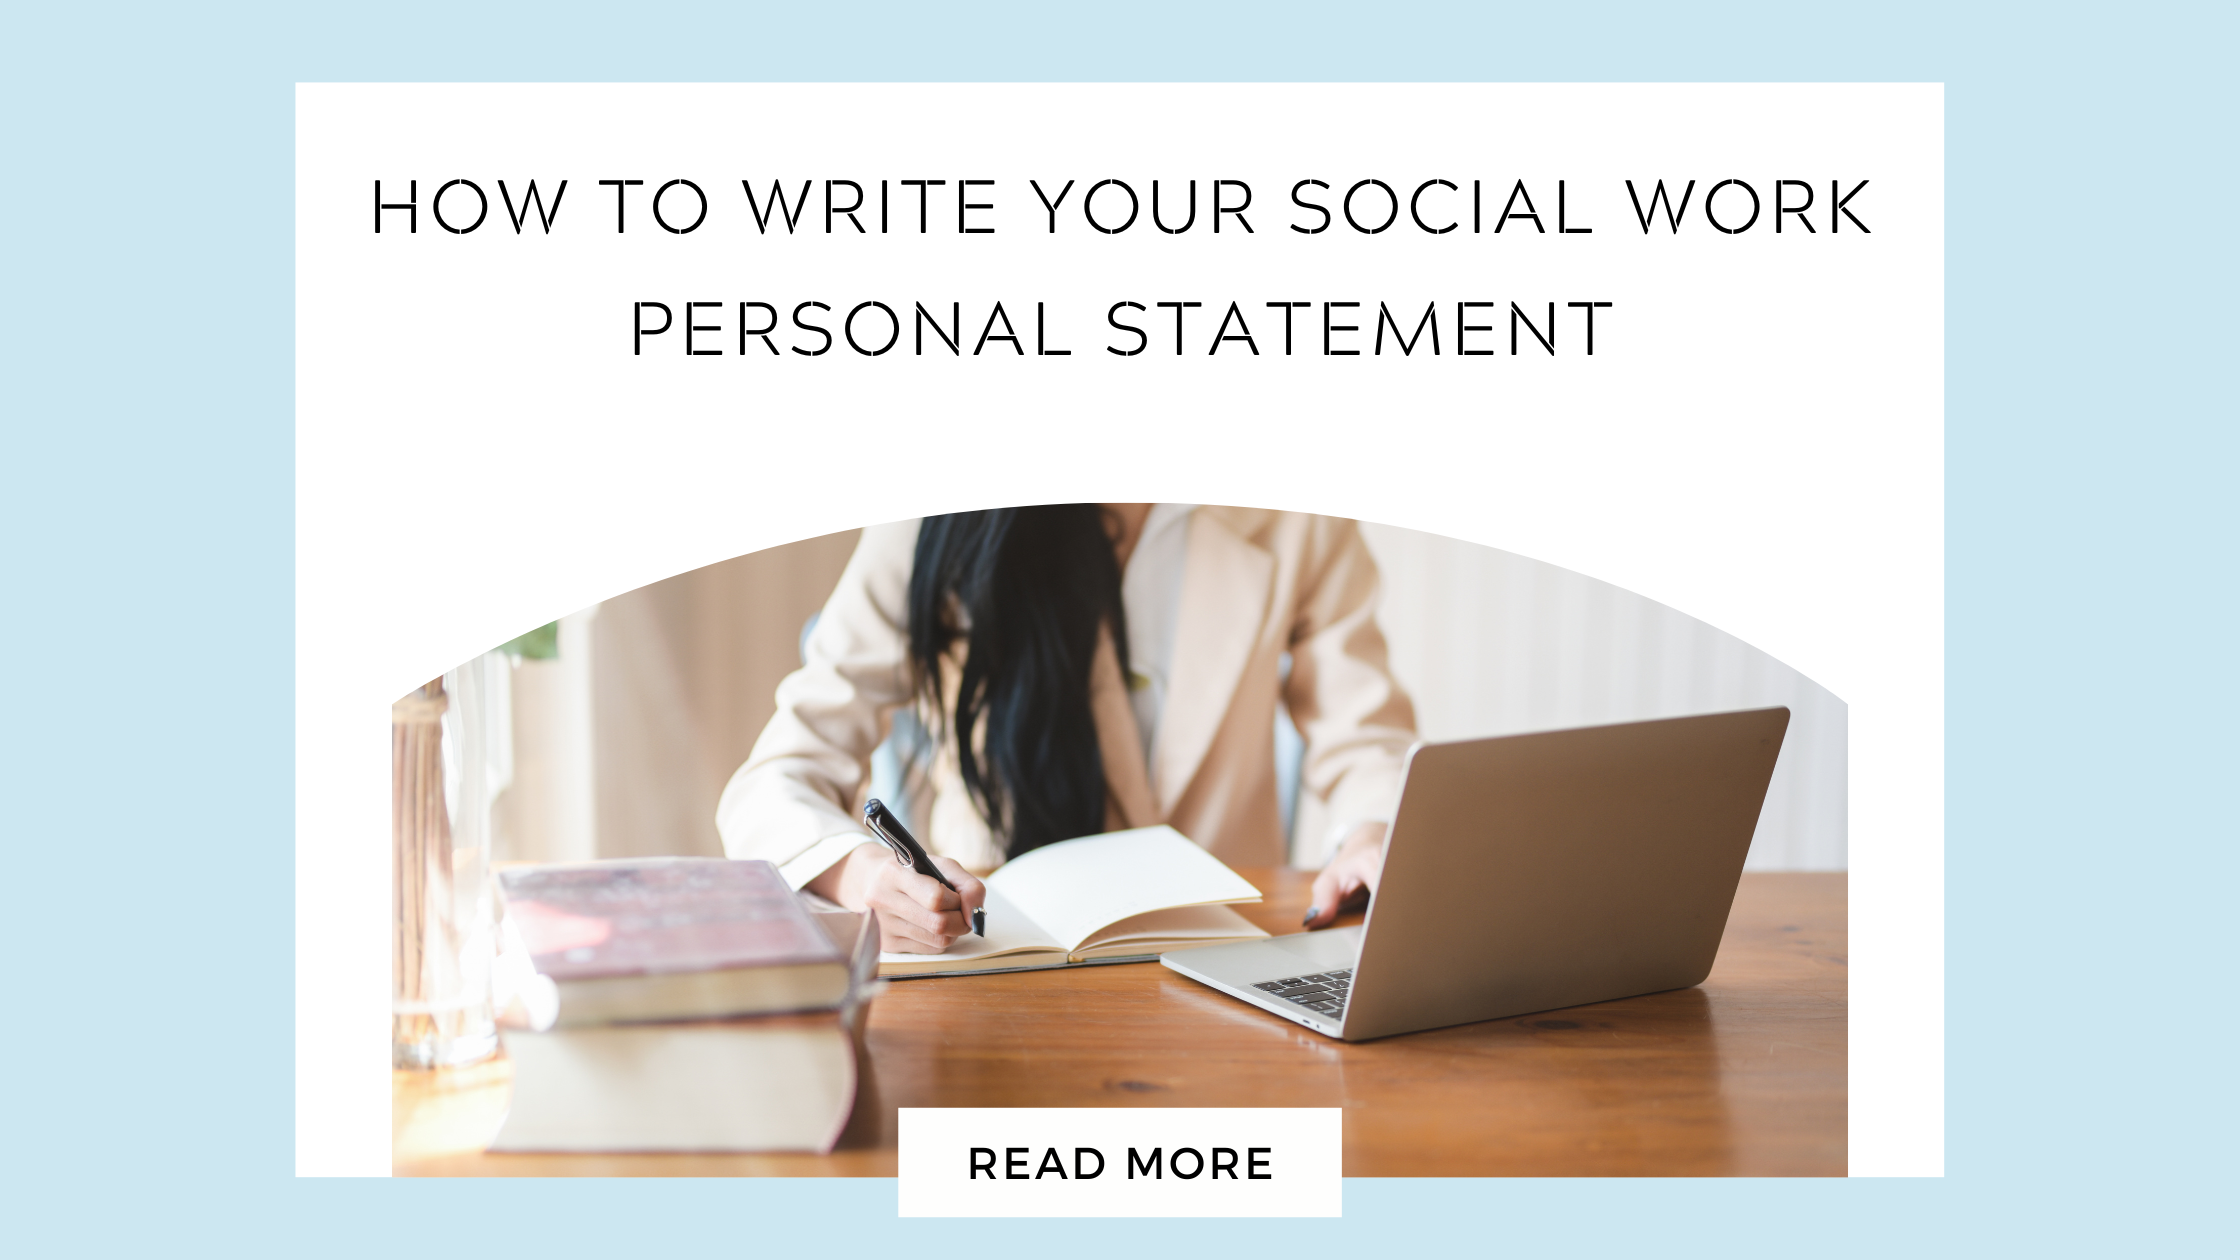 Graphic - How to write your social work personal statement